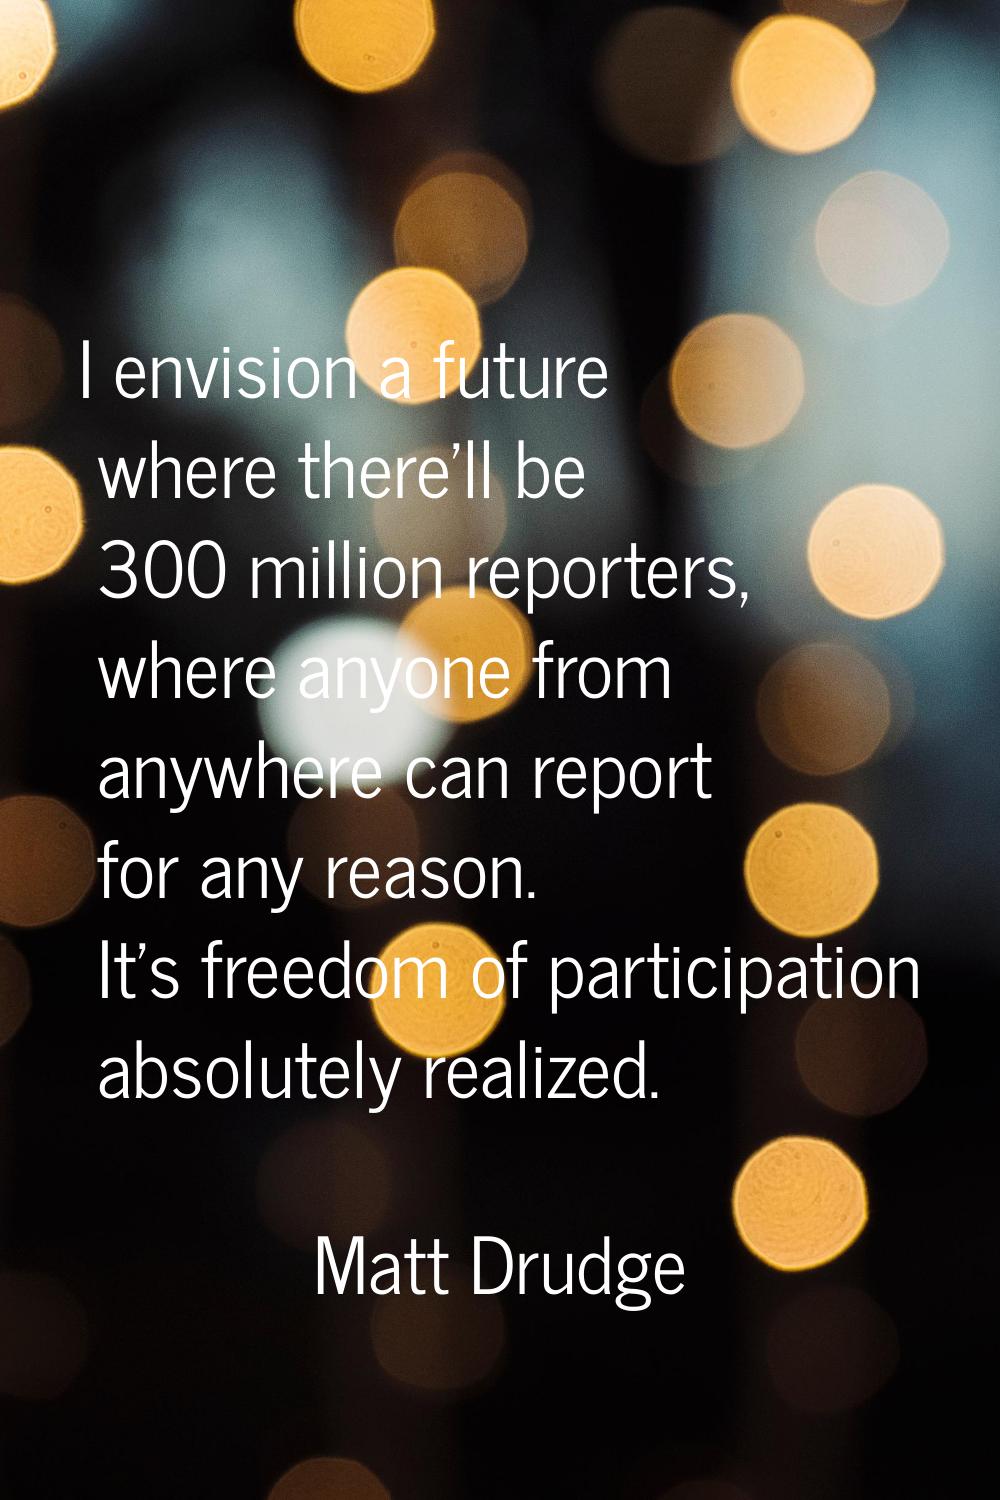 I envision a future where there'll be 300 million reporters, where anyone from anywhere can report 